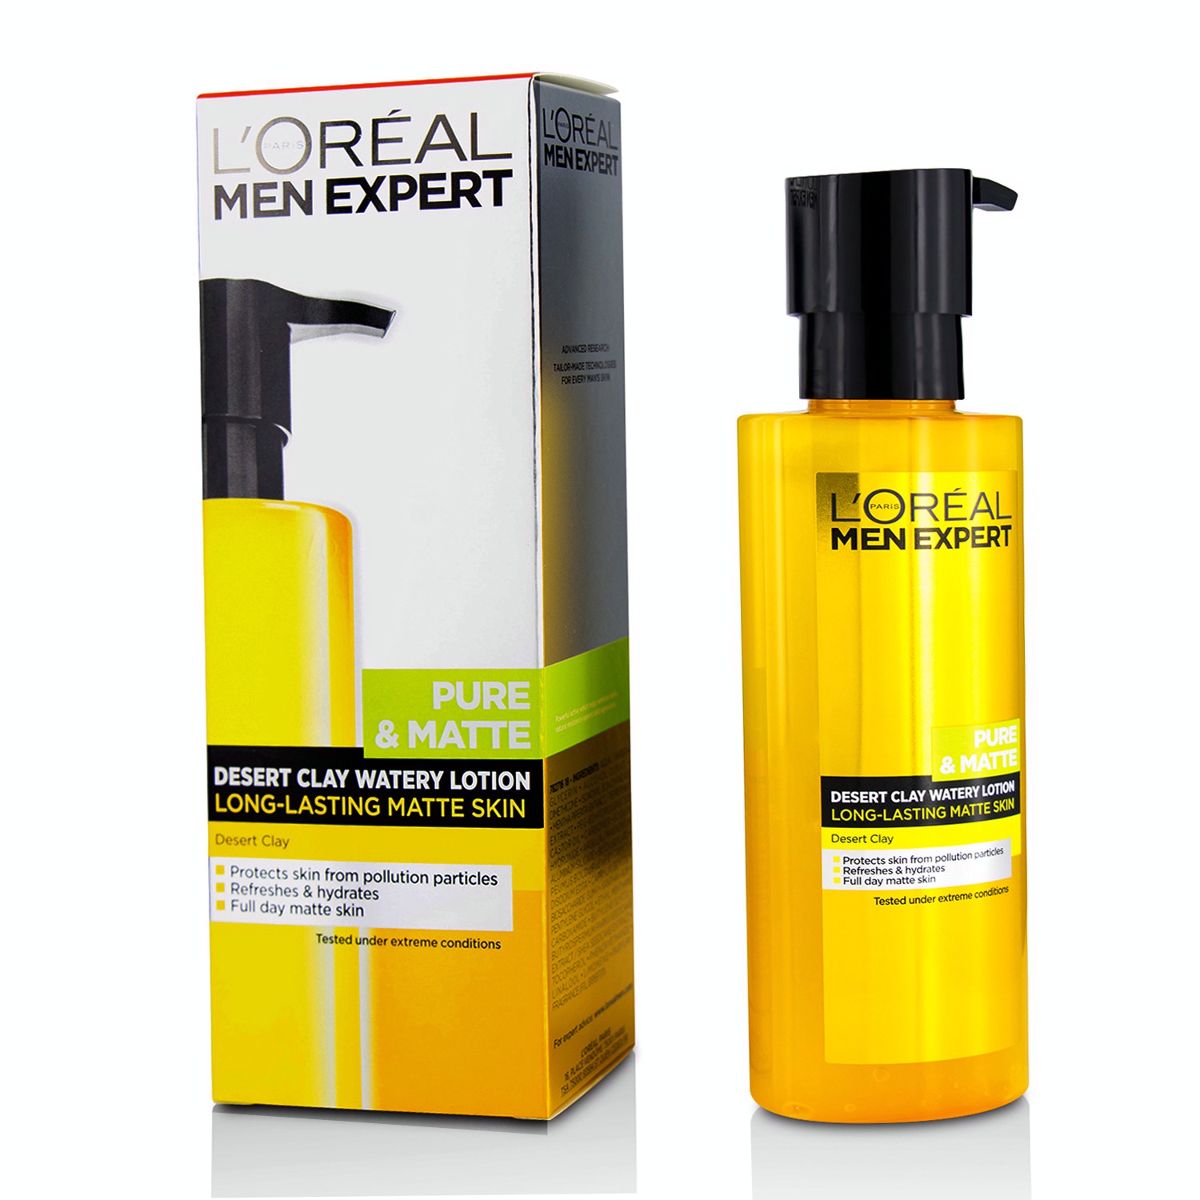 Men Expert Pure  Matte Desert Clay Watery Lotion LOreal Image